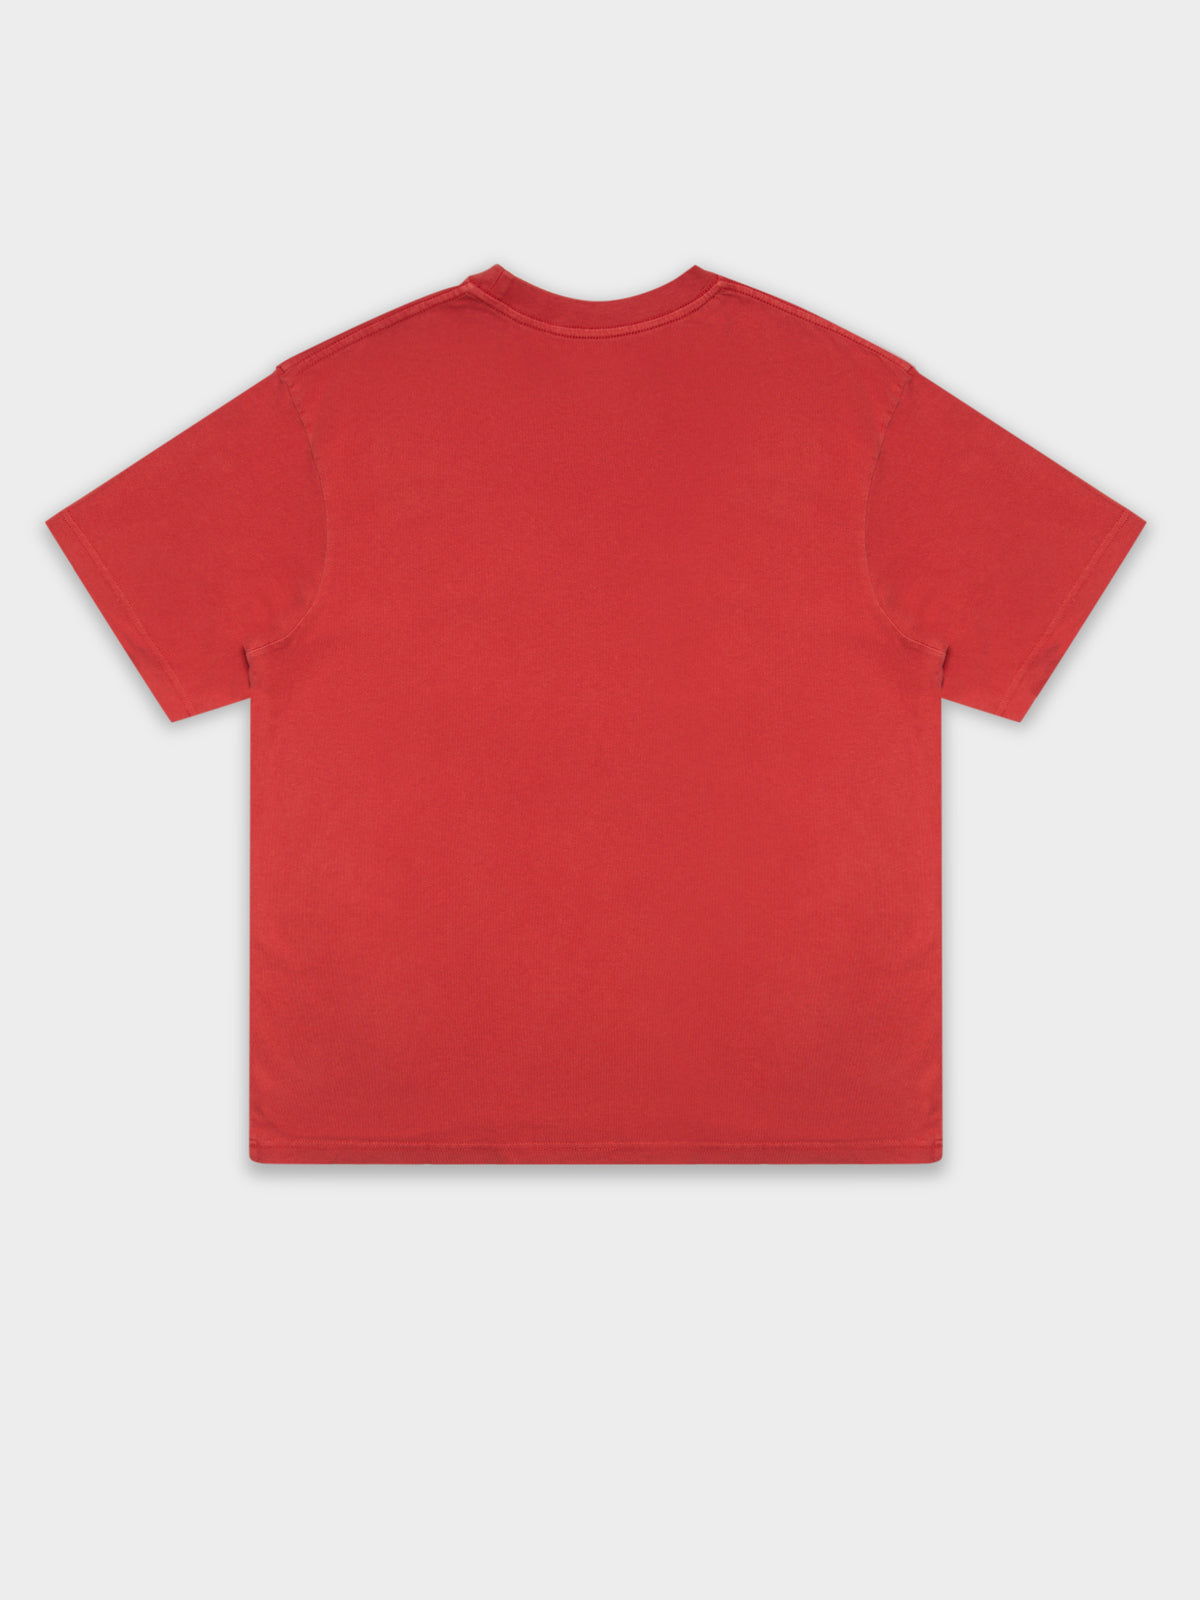 Vintage Championship Trophy T-Shirt in Faded Red